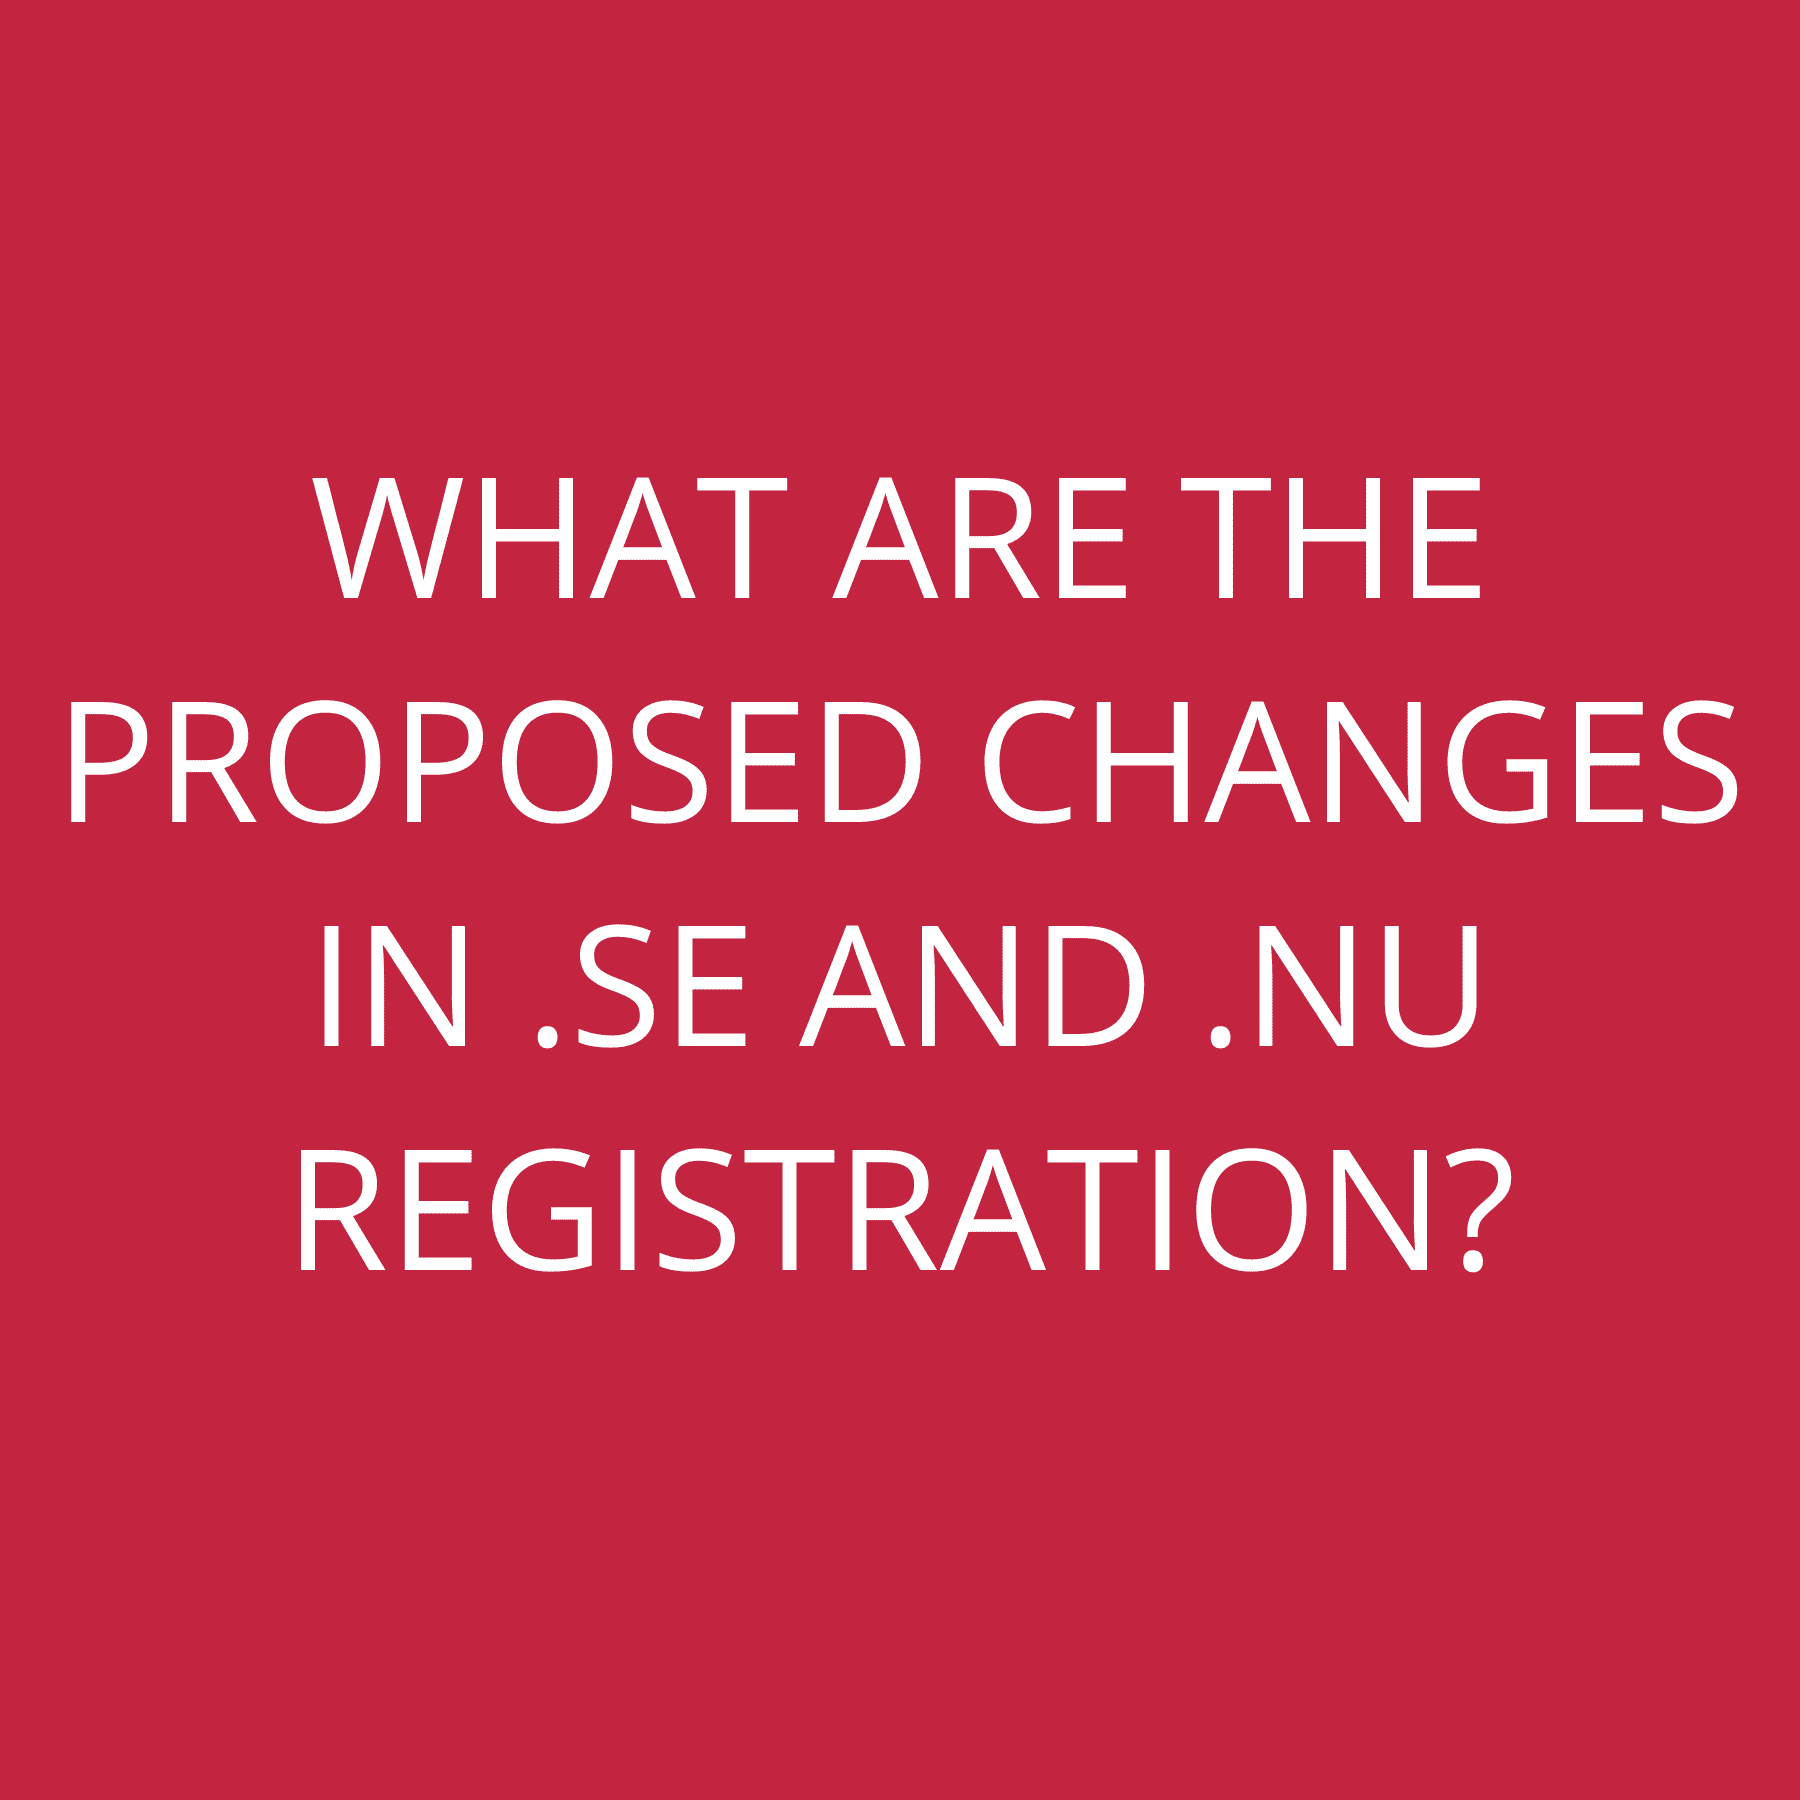 What are the proposed changes in .se and .nu registration?